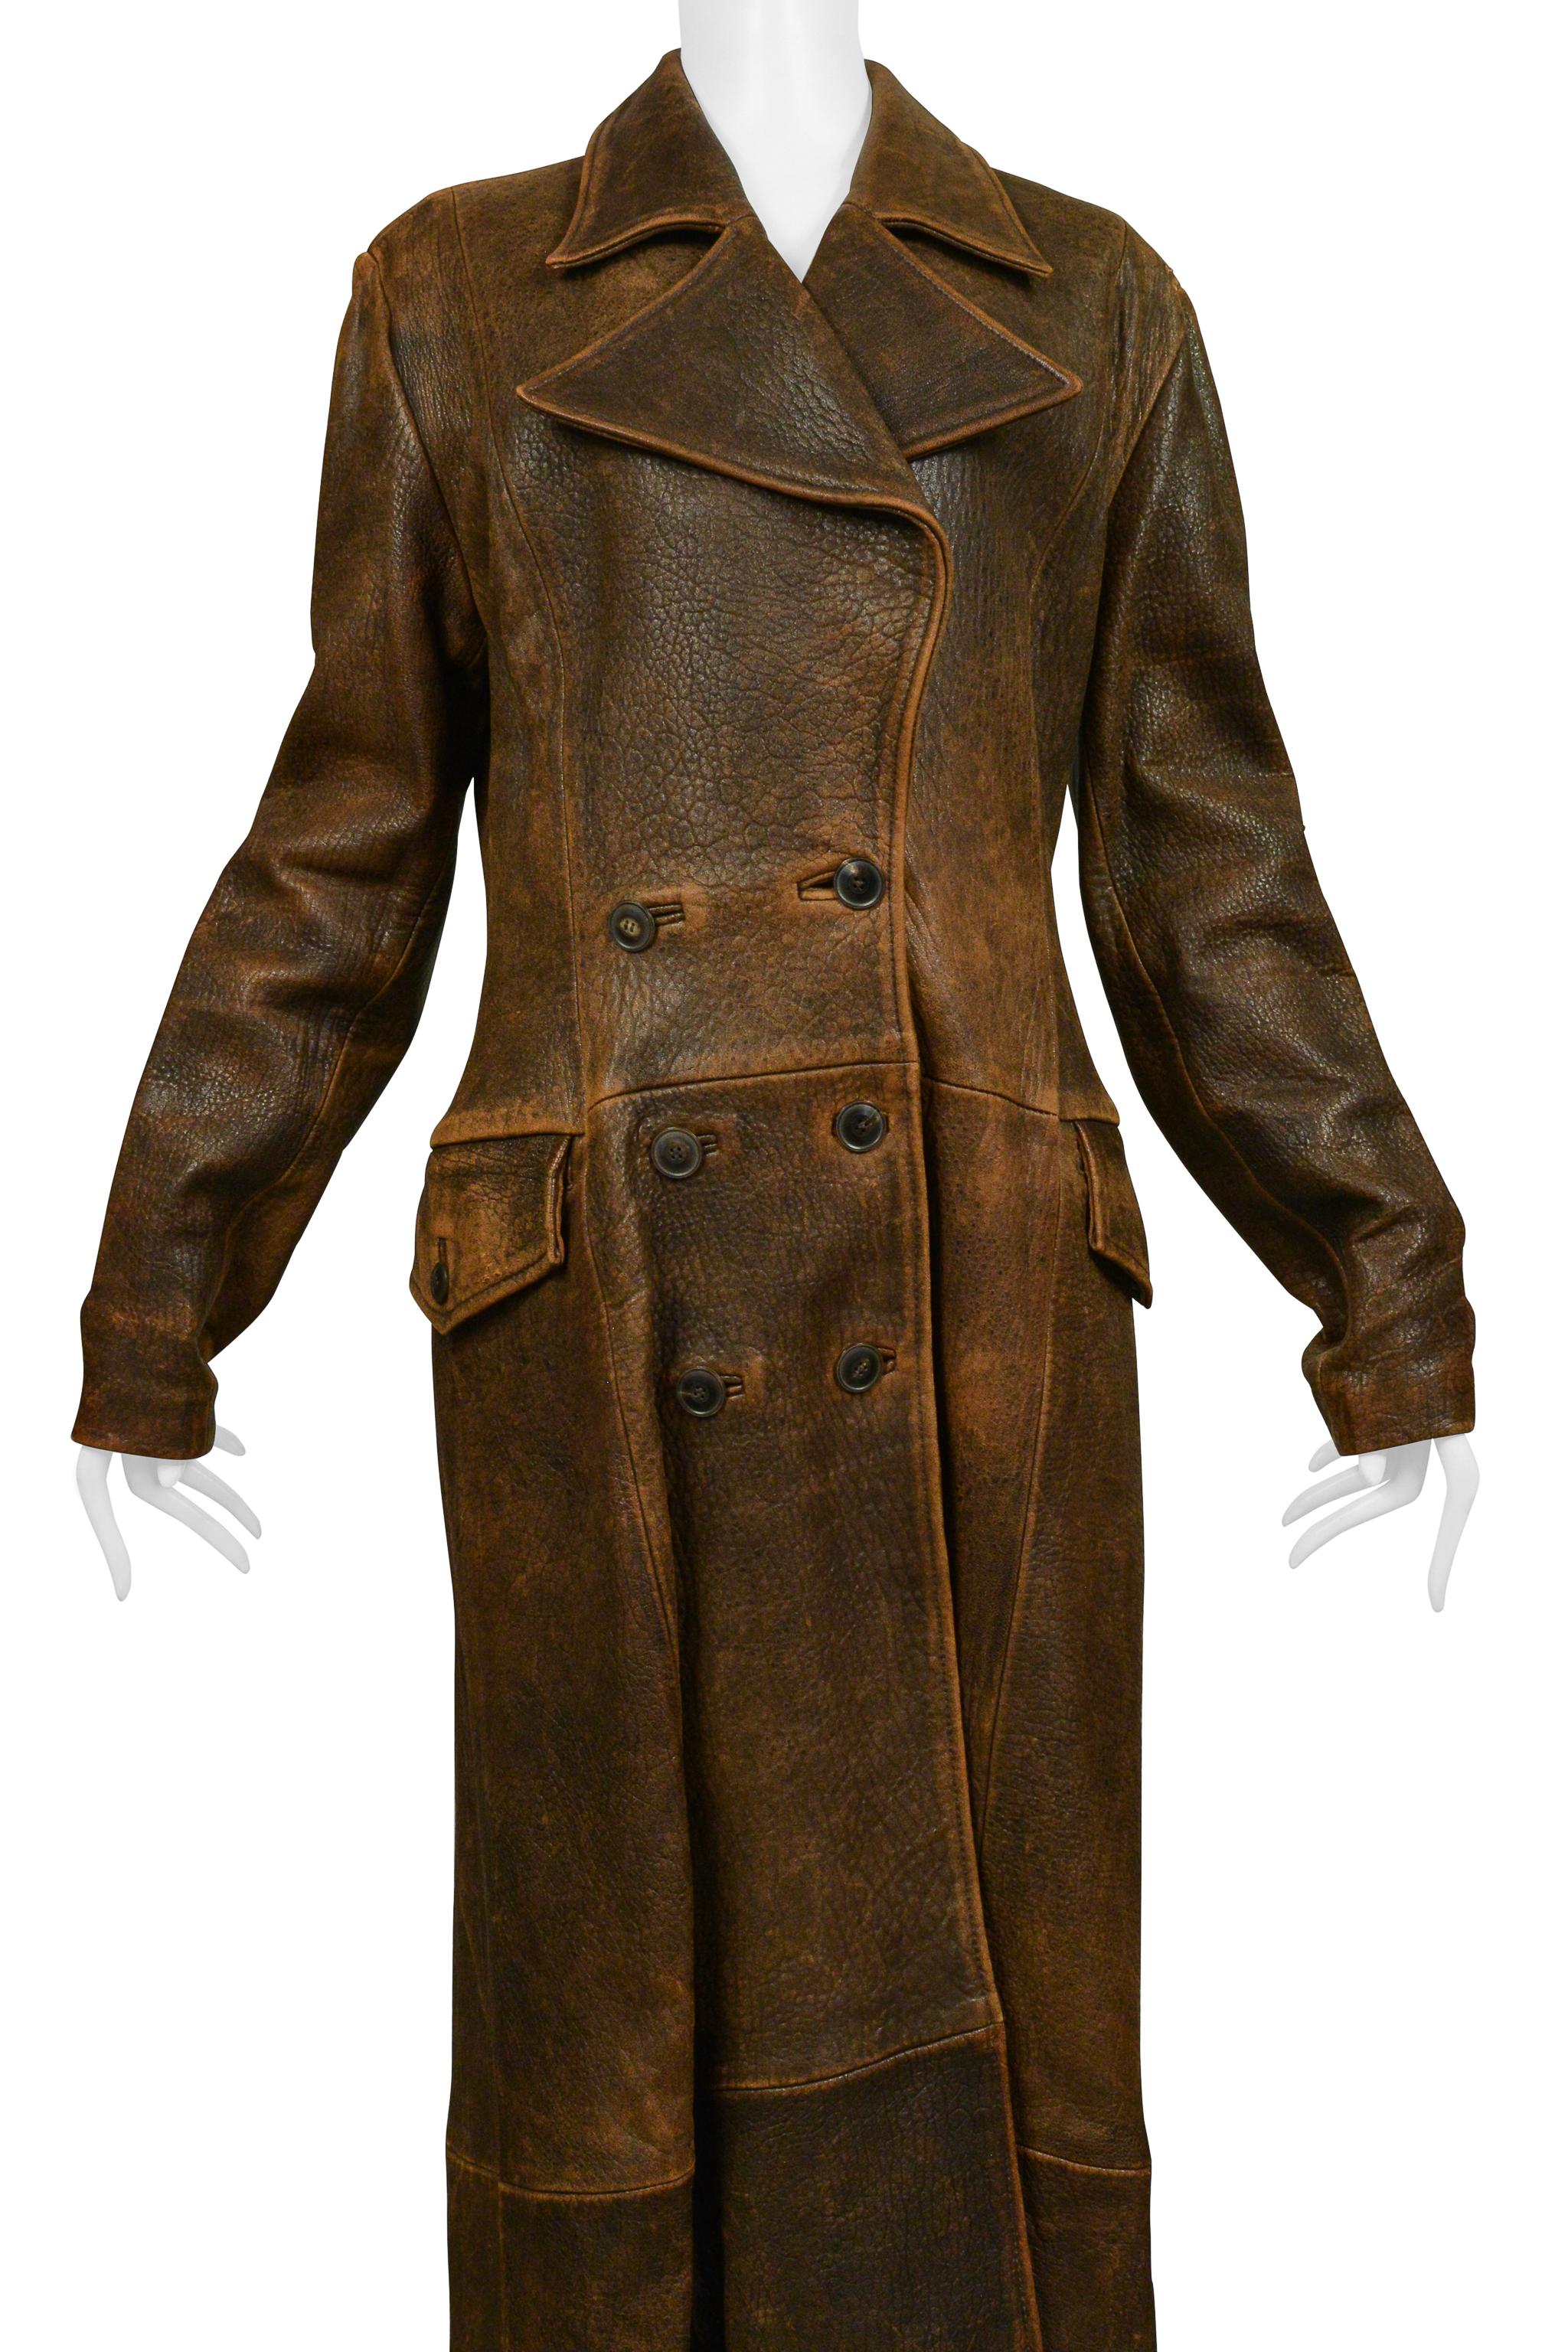 North Beach Leather Brown Distressed Duster In Good Condition For Sale In Los Angeles, CA